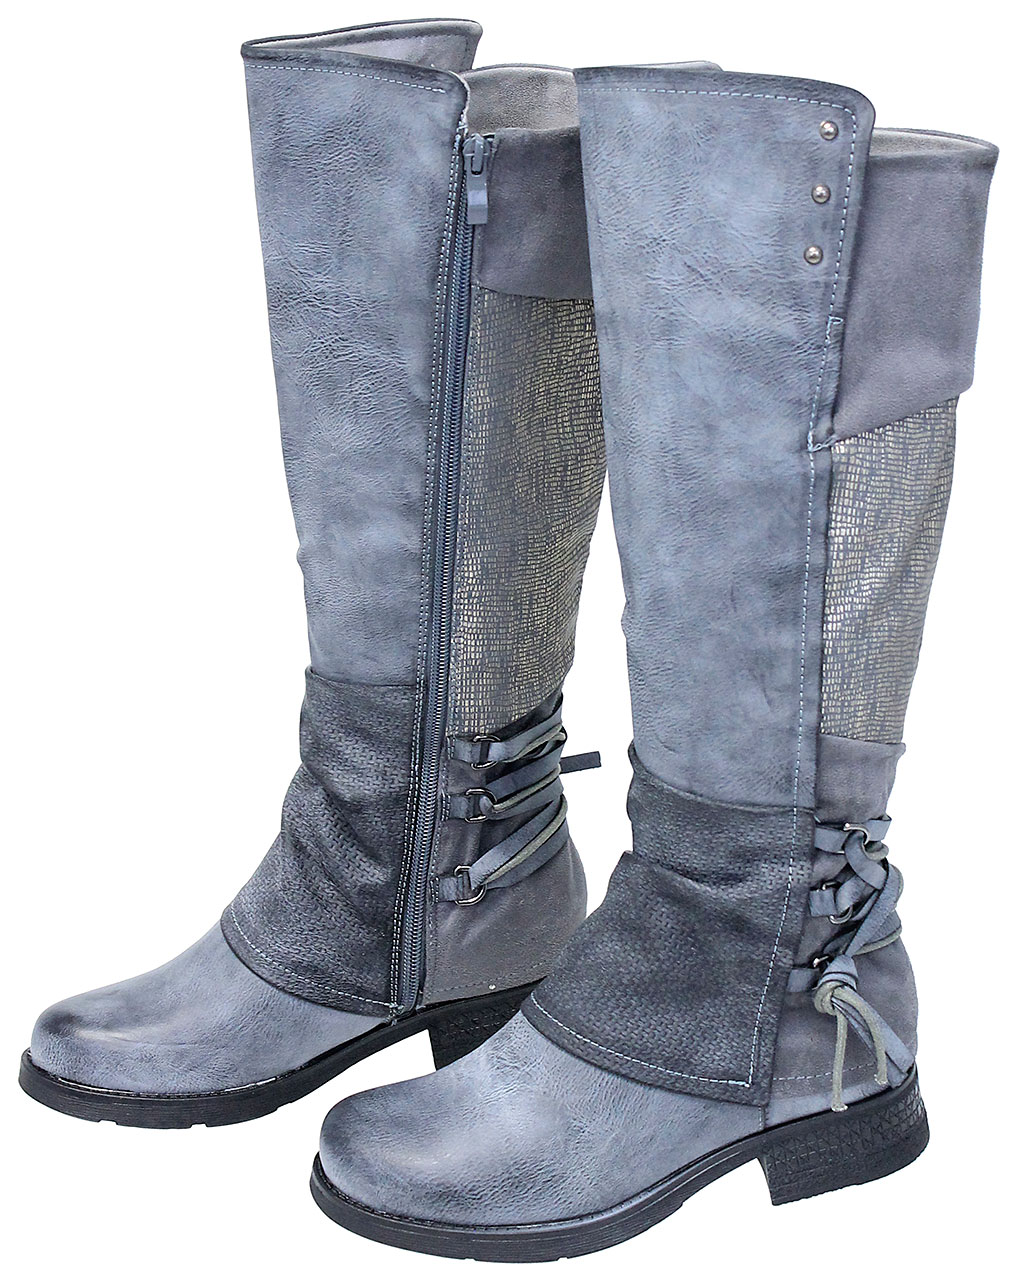 WOMEN'S GRAY LEATHER BOOTS